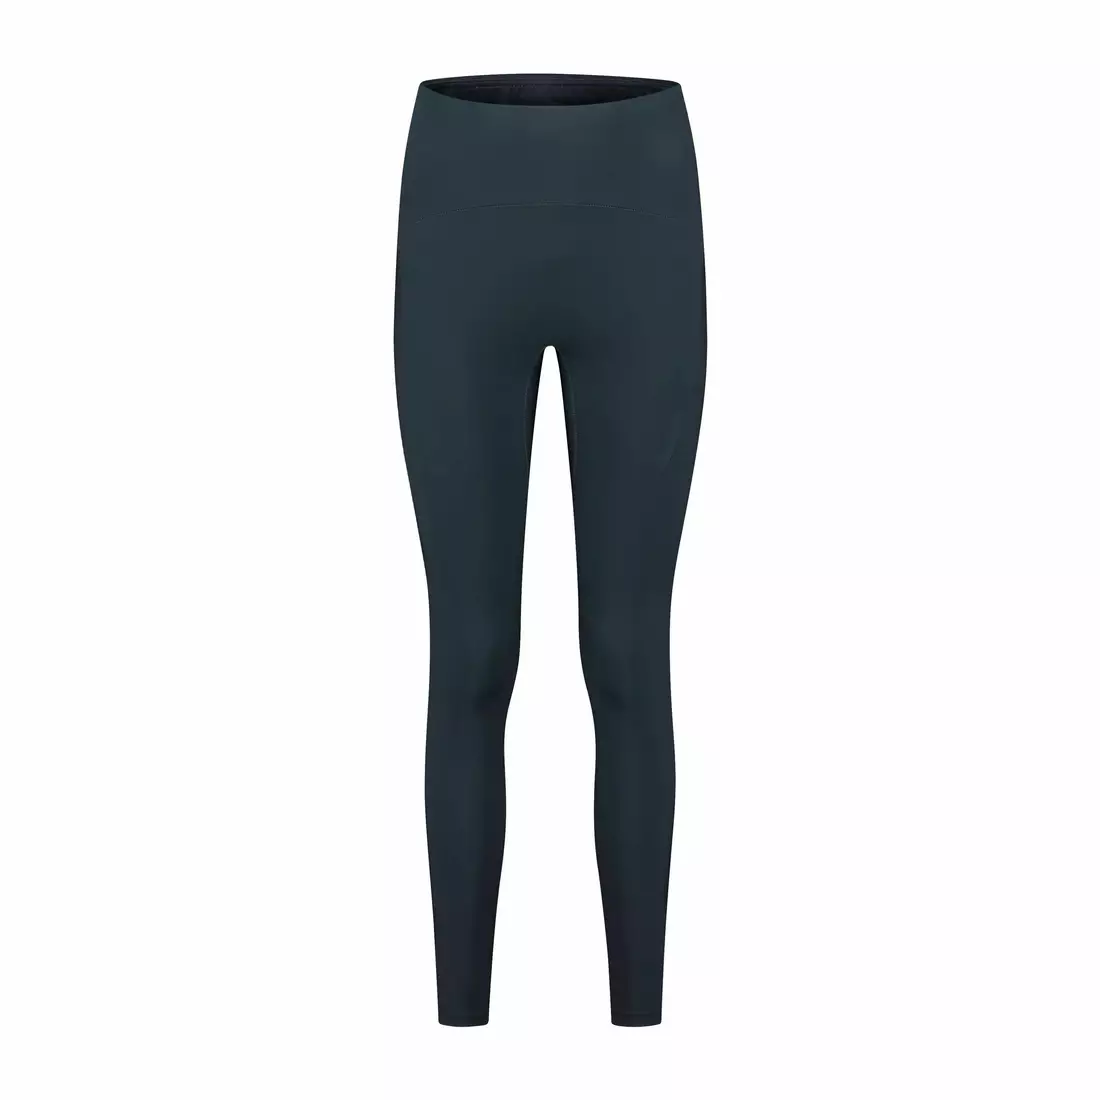 Rogelli women's ECLIPSE insulated running pants